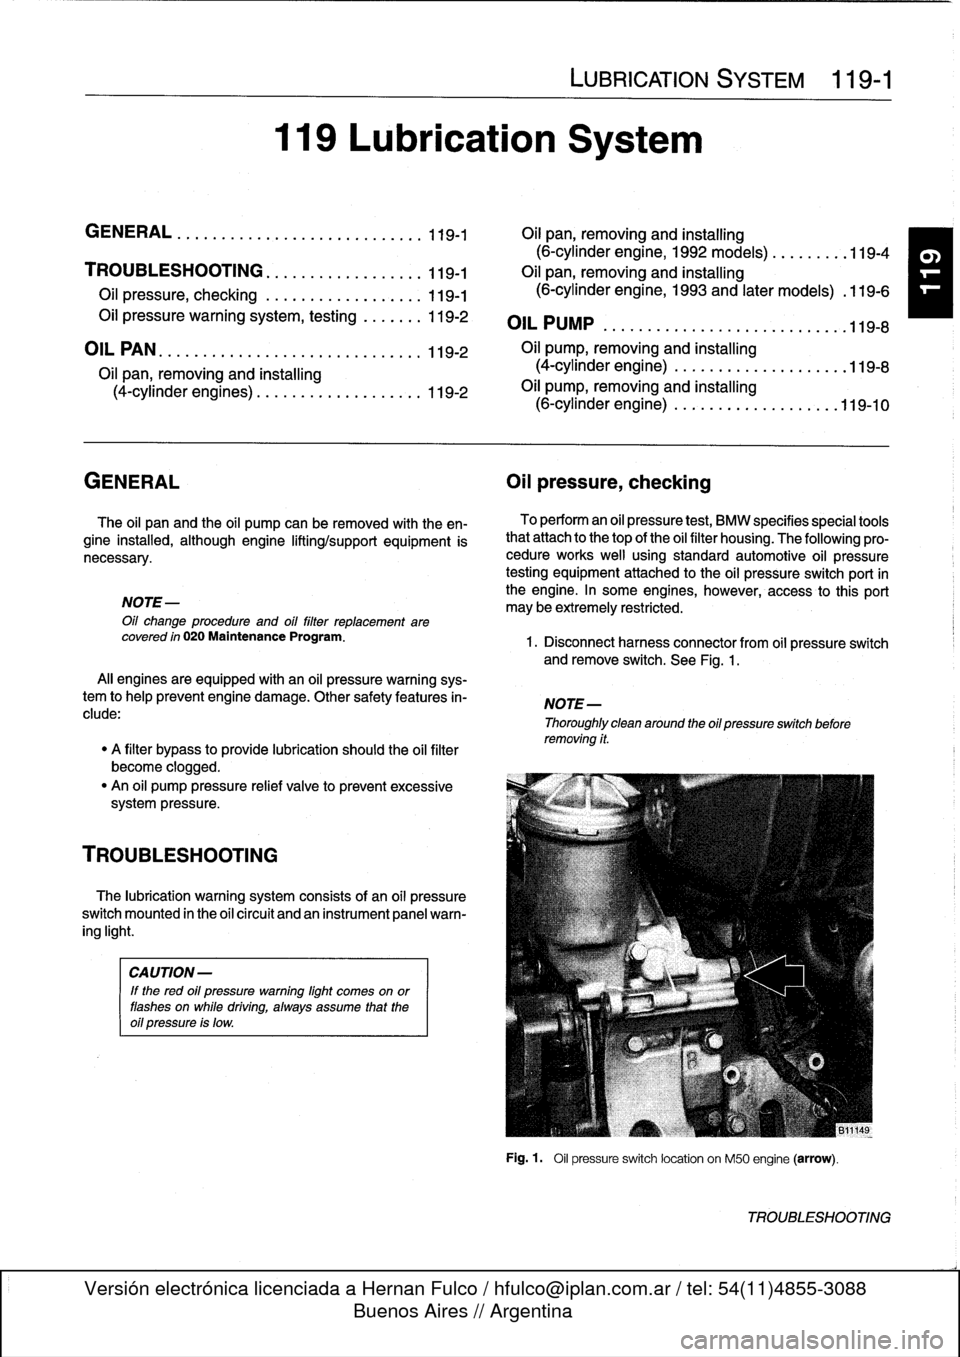 BMW 318i 1997 E36 Owners Manual 
119
Lubrication
System

LUBRICATION
SYSTEM

	

119-1

GENERAL
.
.
.
.
.
.
...
.
.
.
.
.
.
.
...,
,
...
.
.
.
.
119-1

	

OH
pan,
removing
and
installing

(6-cylinder
engine,
1992
models)
.
.
.
.
.
.
